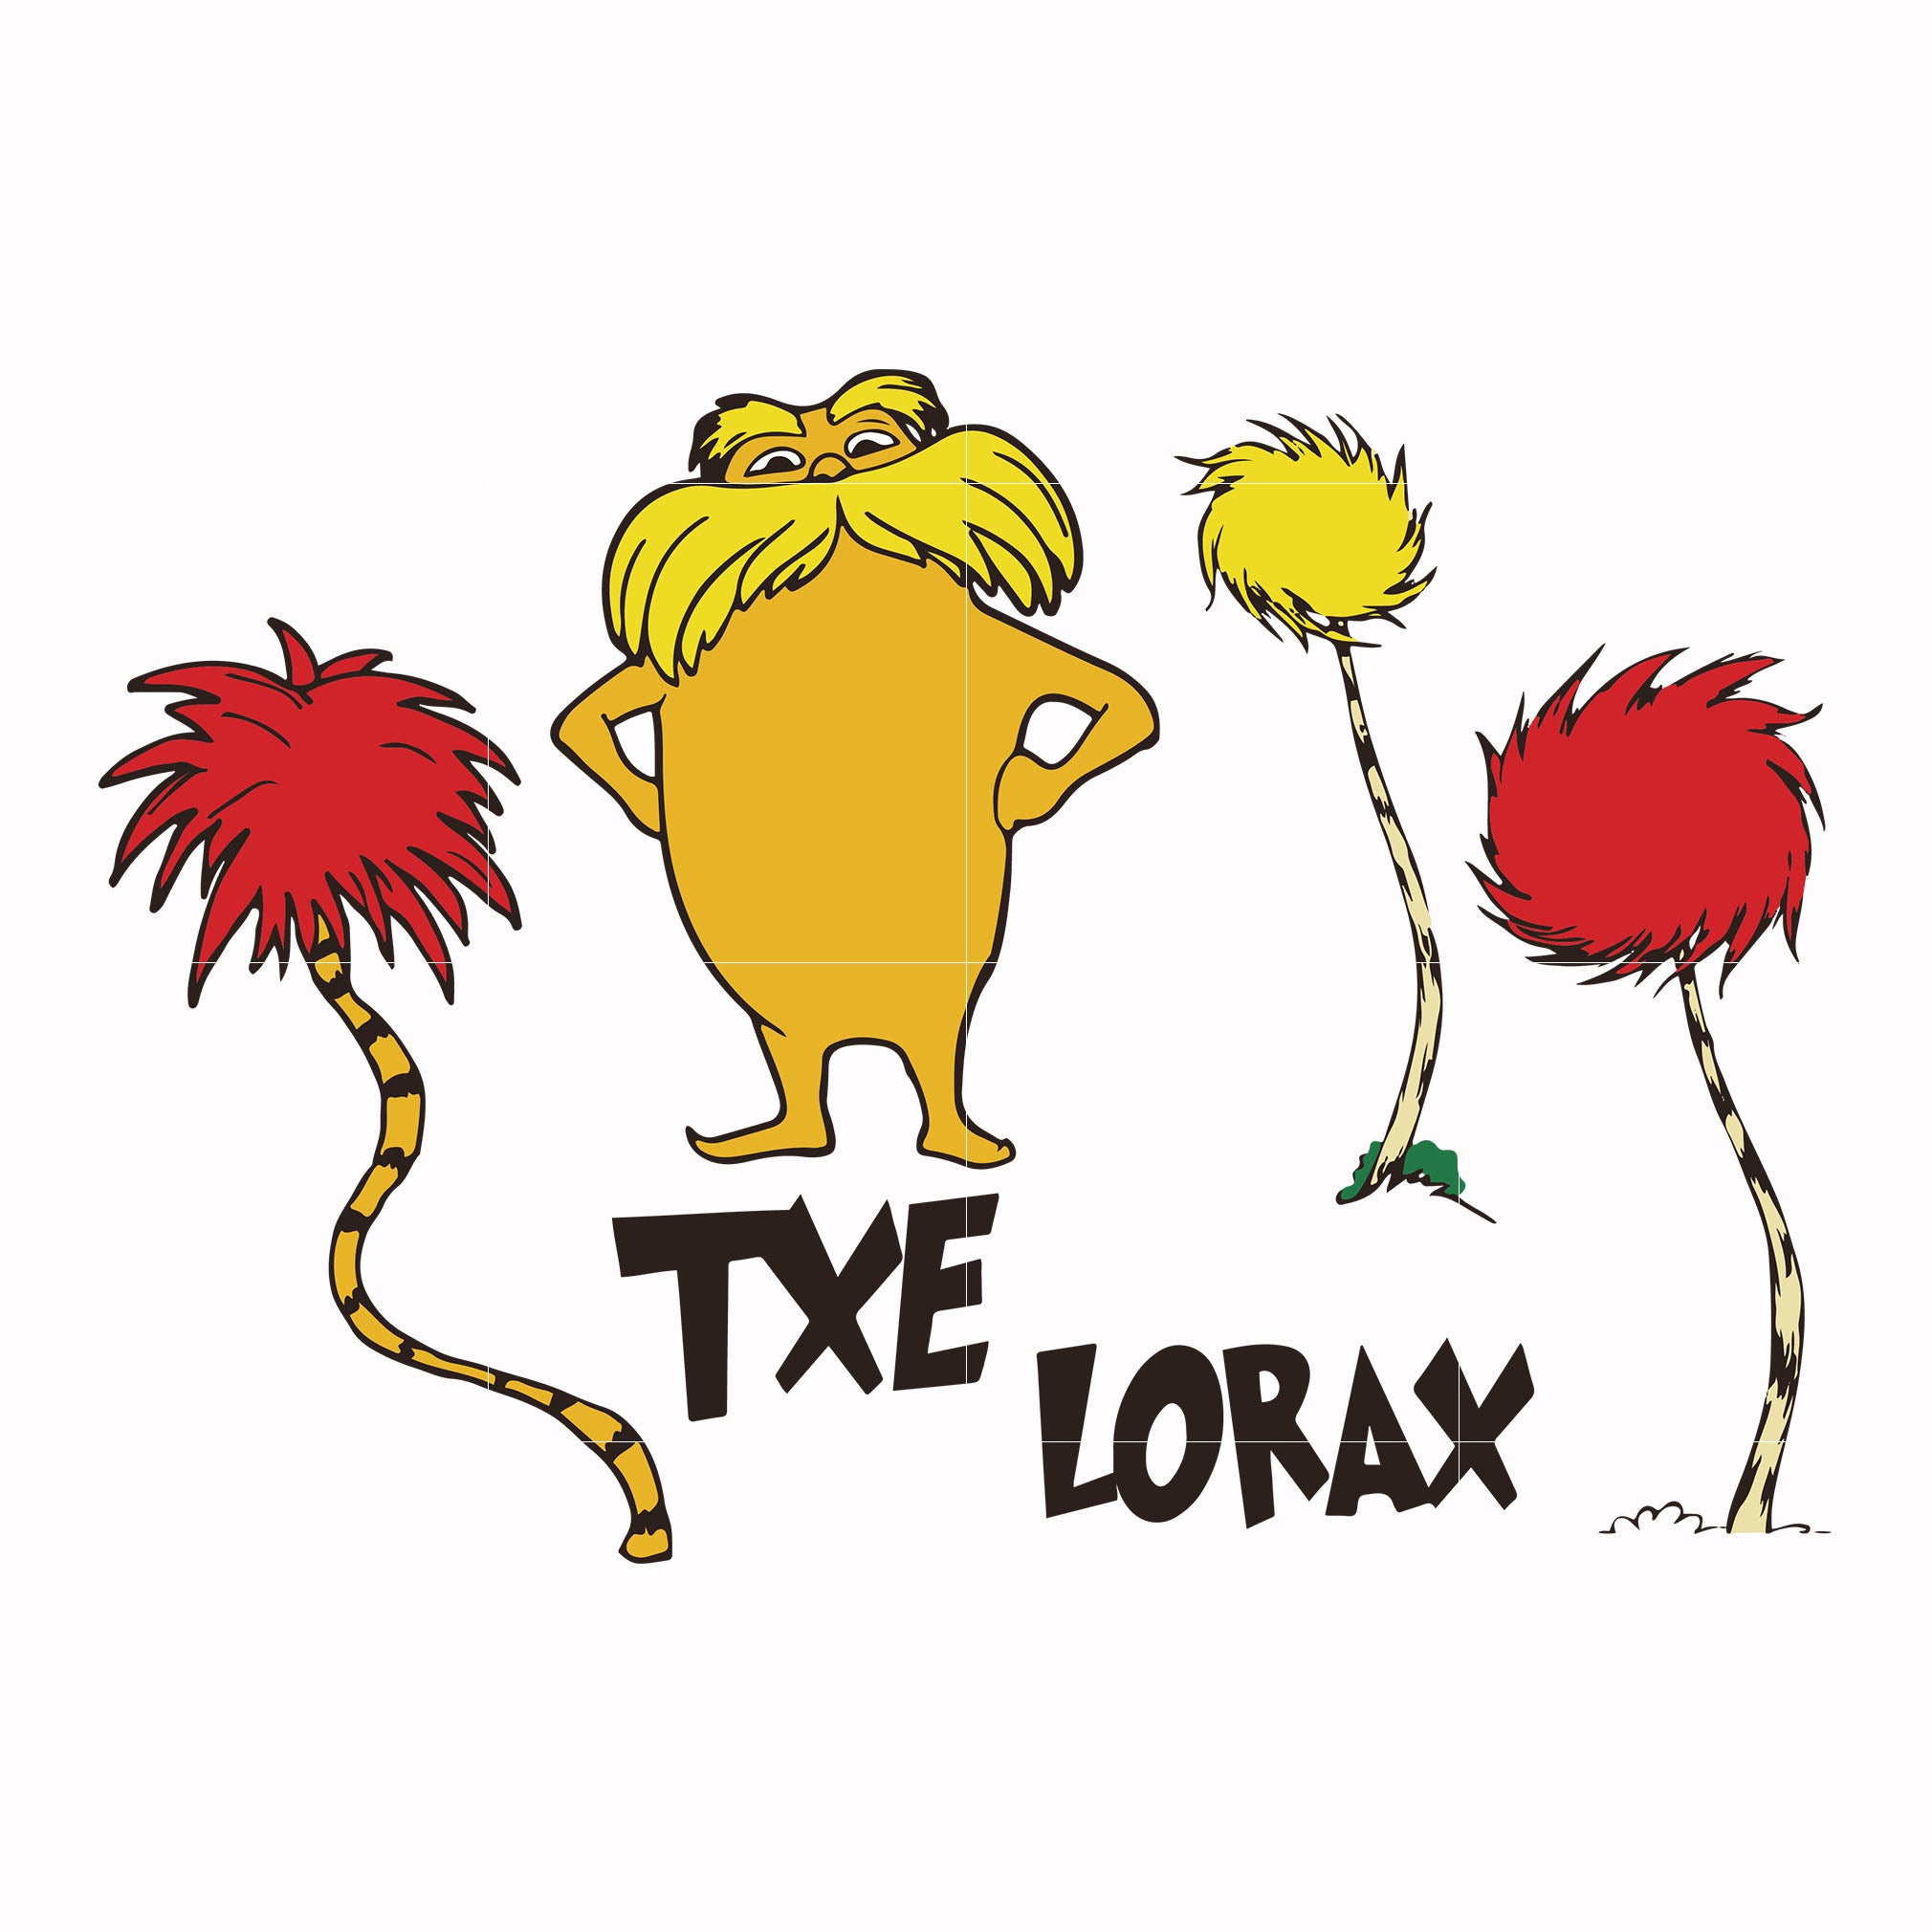 TXE Lorax svg, png, dxf, eps file